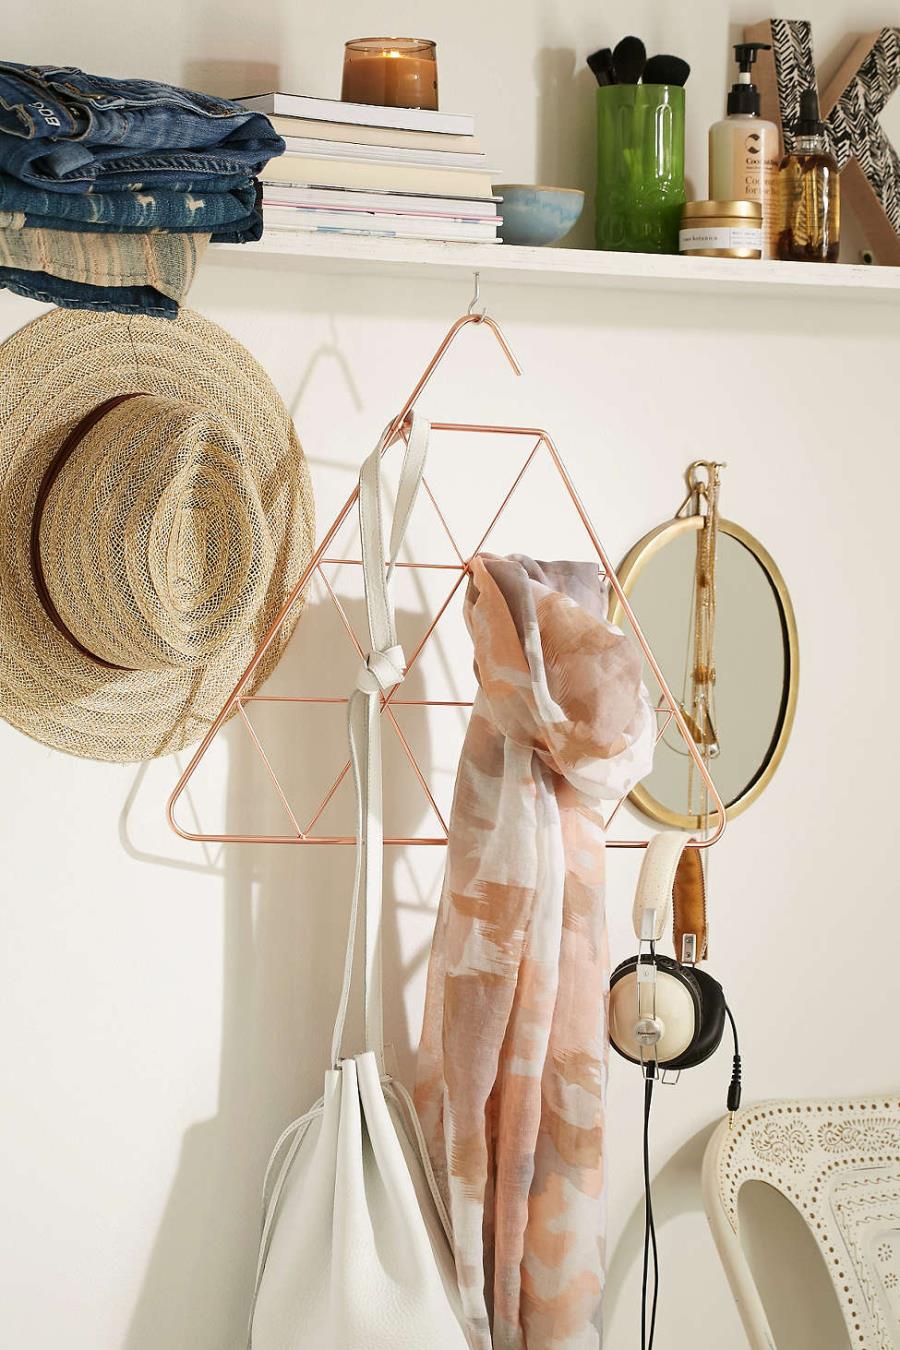 Triangle accessory holder from Urban Outfitters